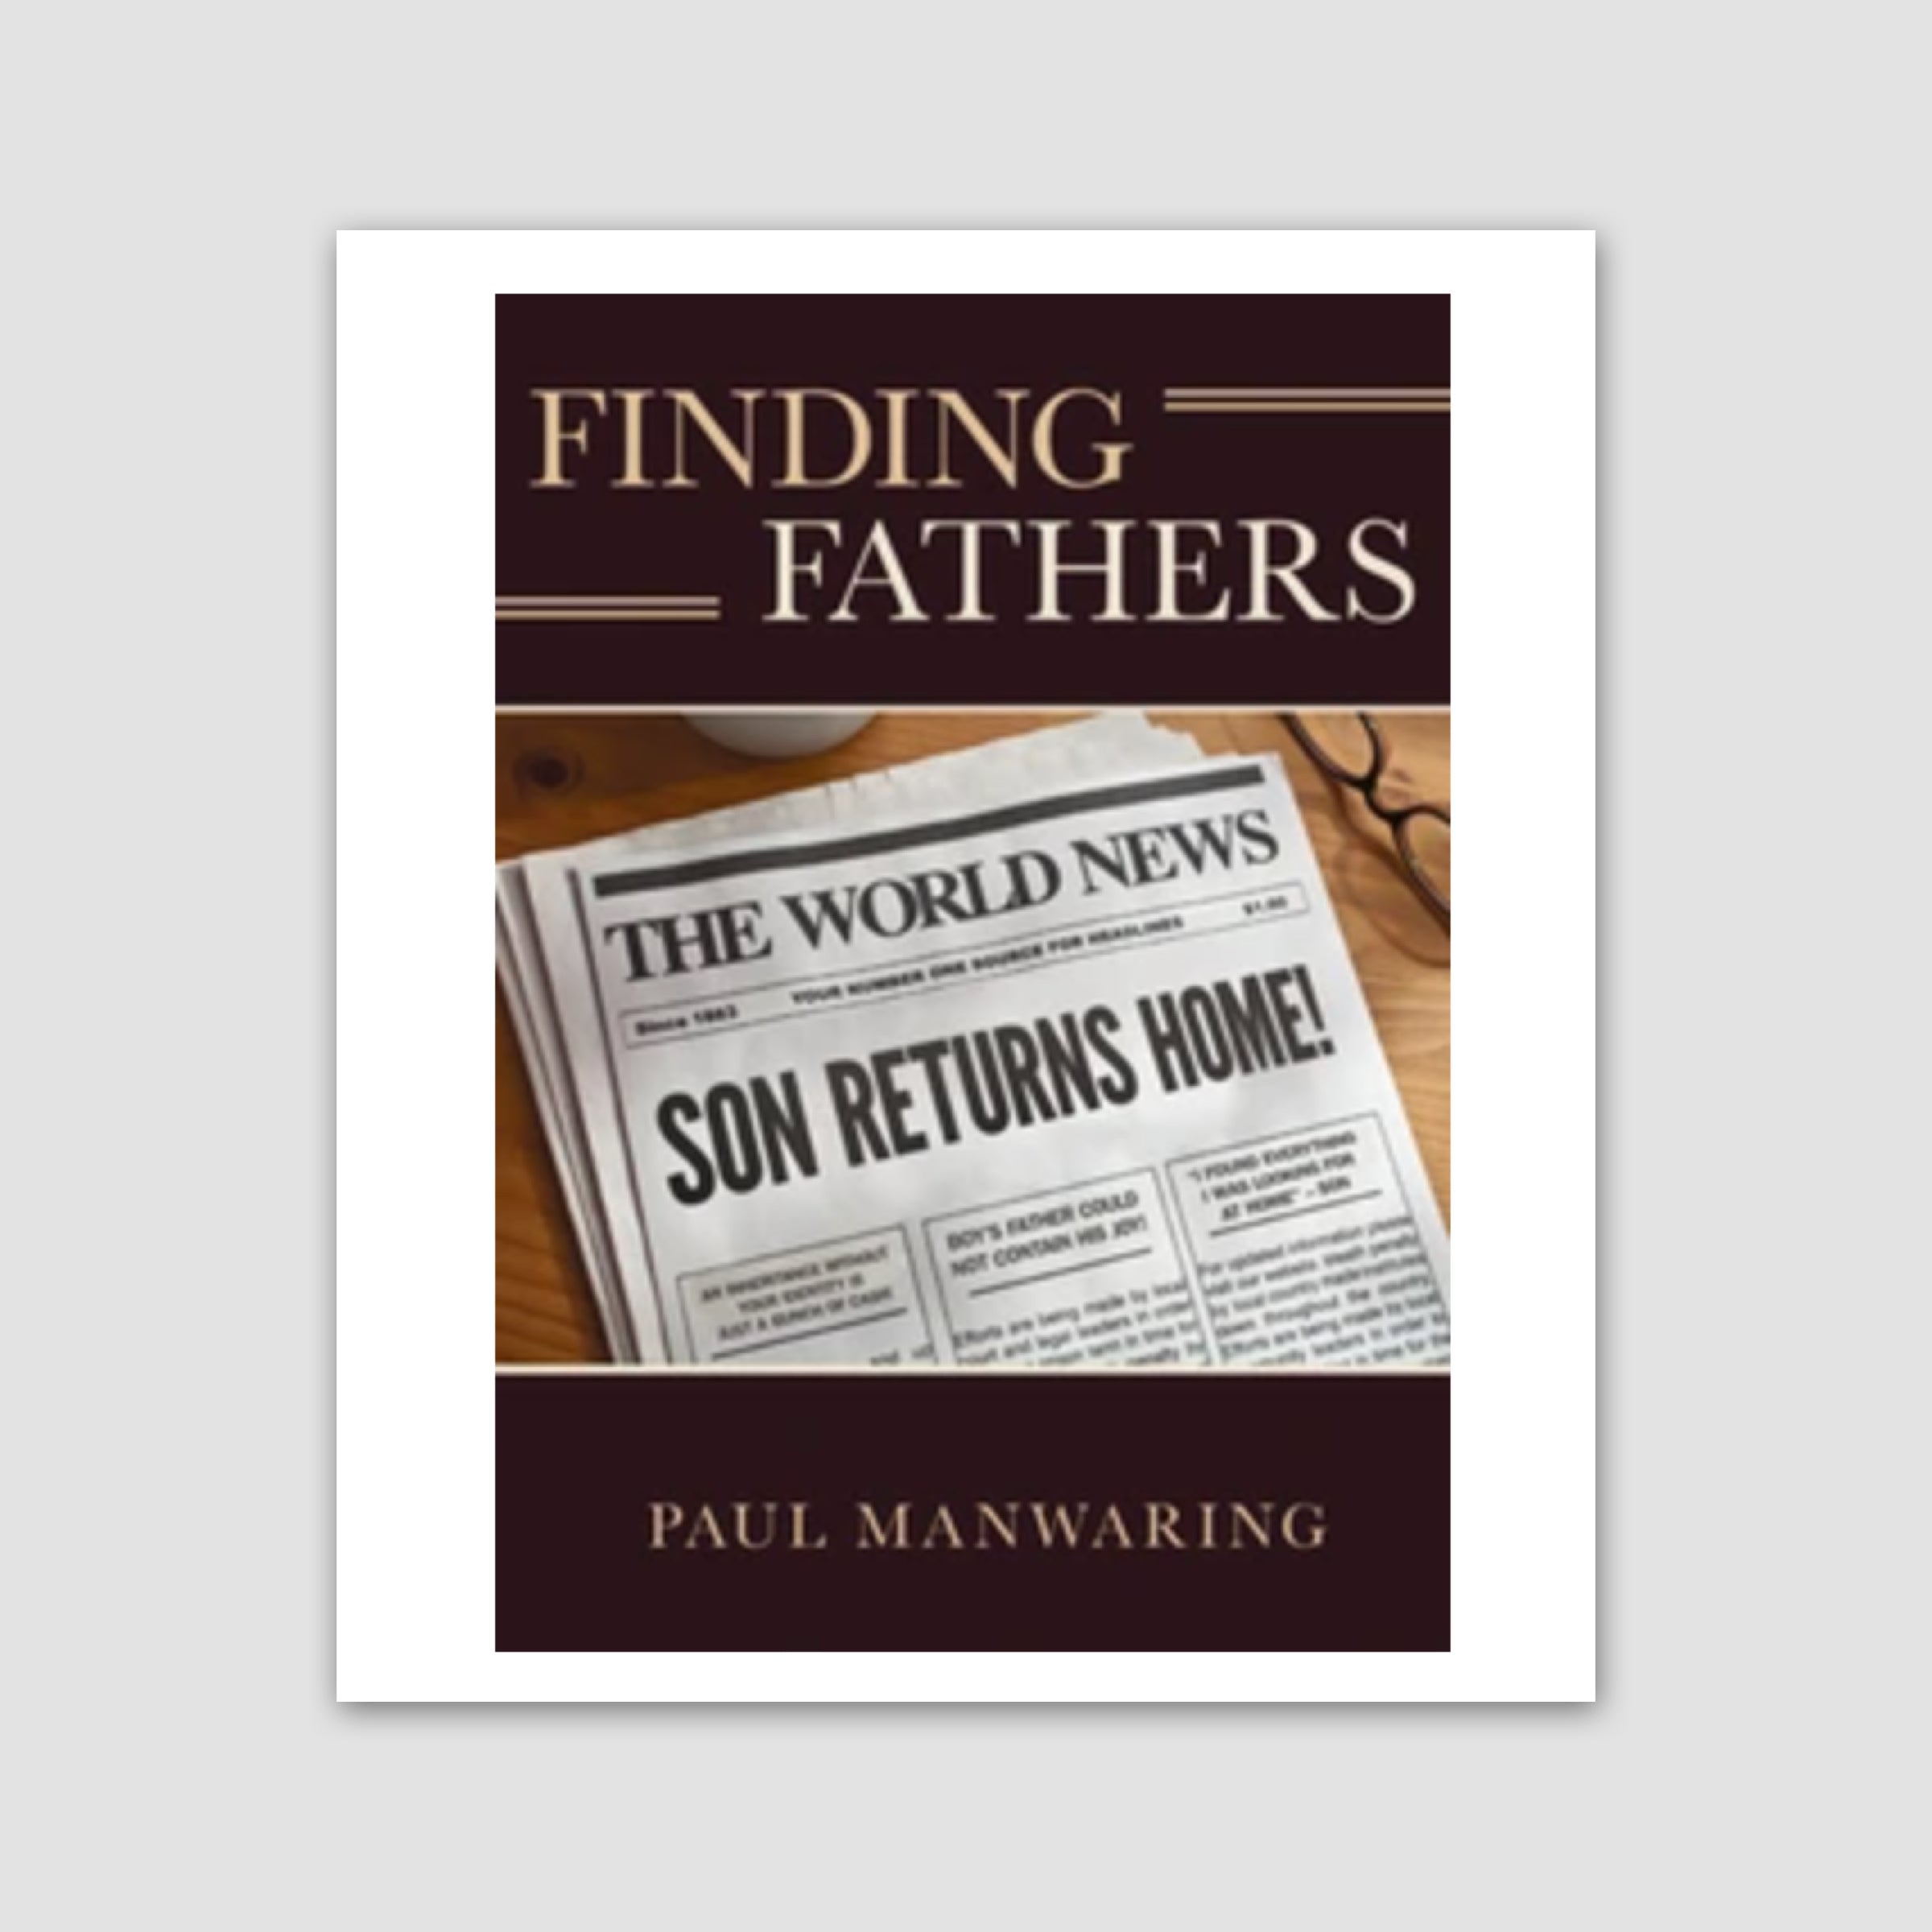 Finding Fathers